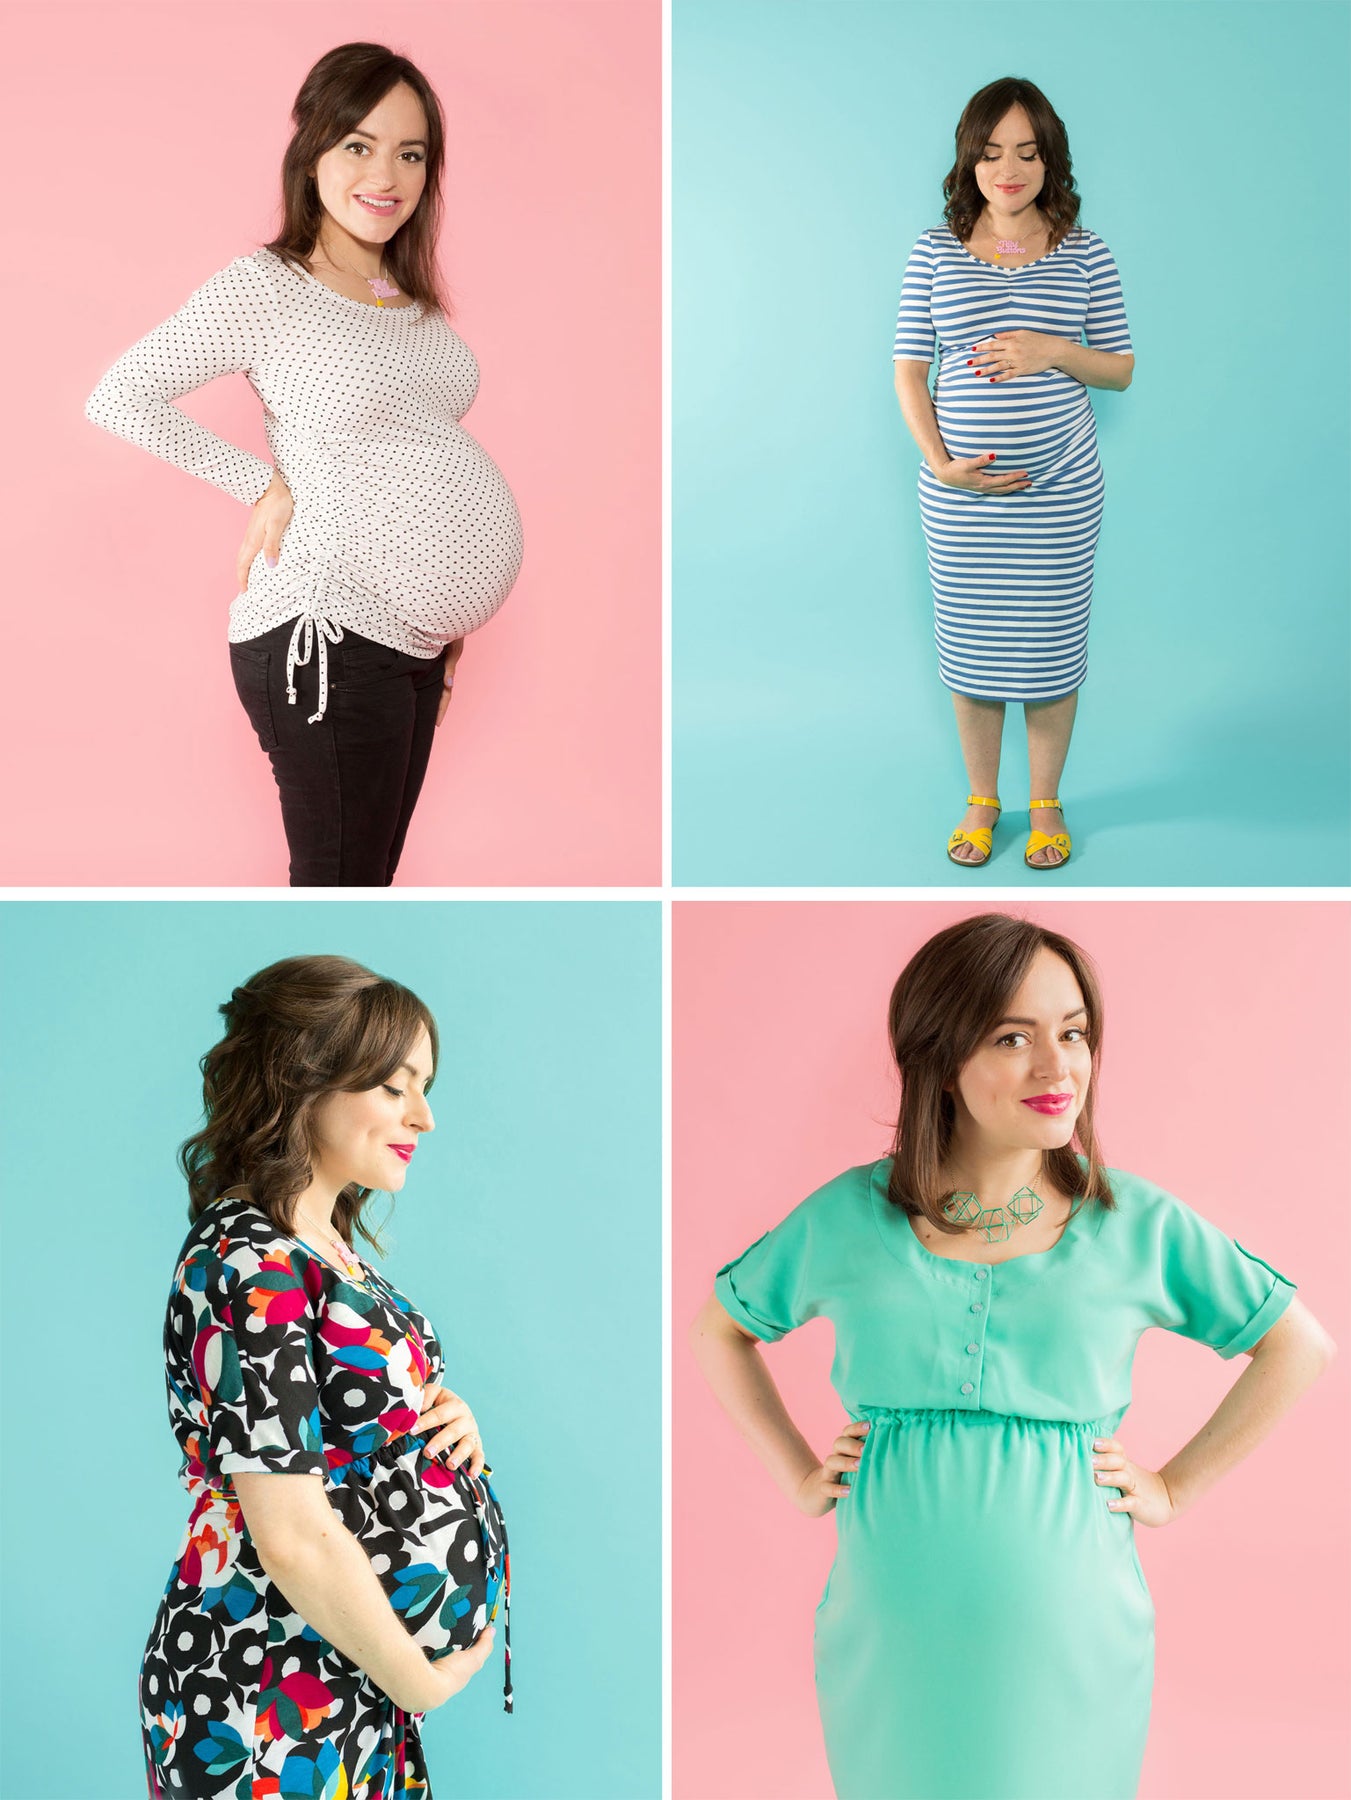 MATERNITY PDF SEWING PATTERN BUNDLE – Tilly and the Buttons